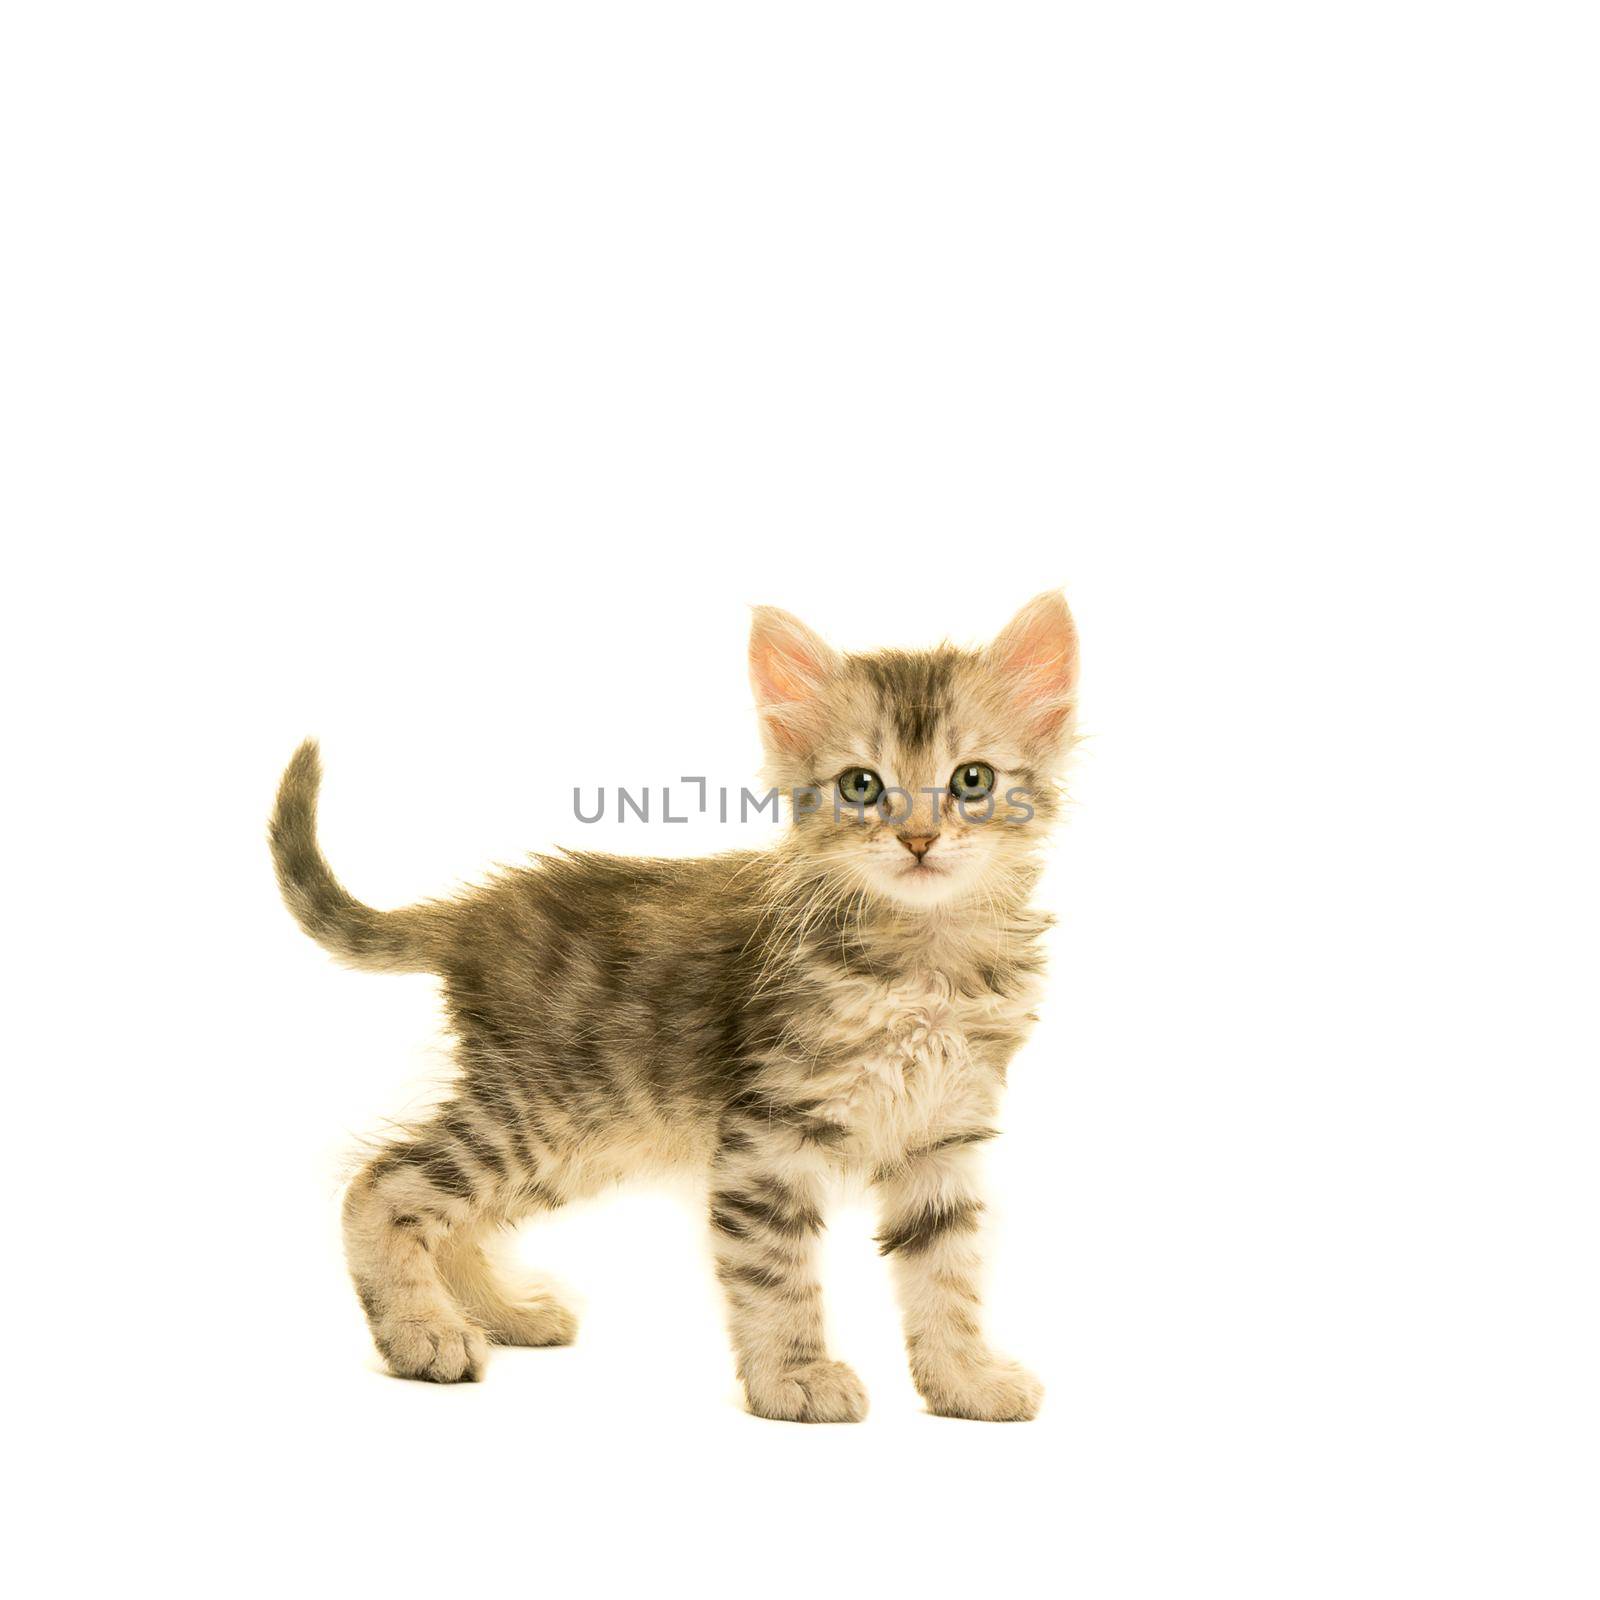 Tabby turkish angora cat kitten looking at the camera isolated on a white background by LeoniekvanderVliet